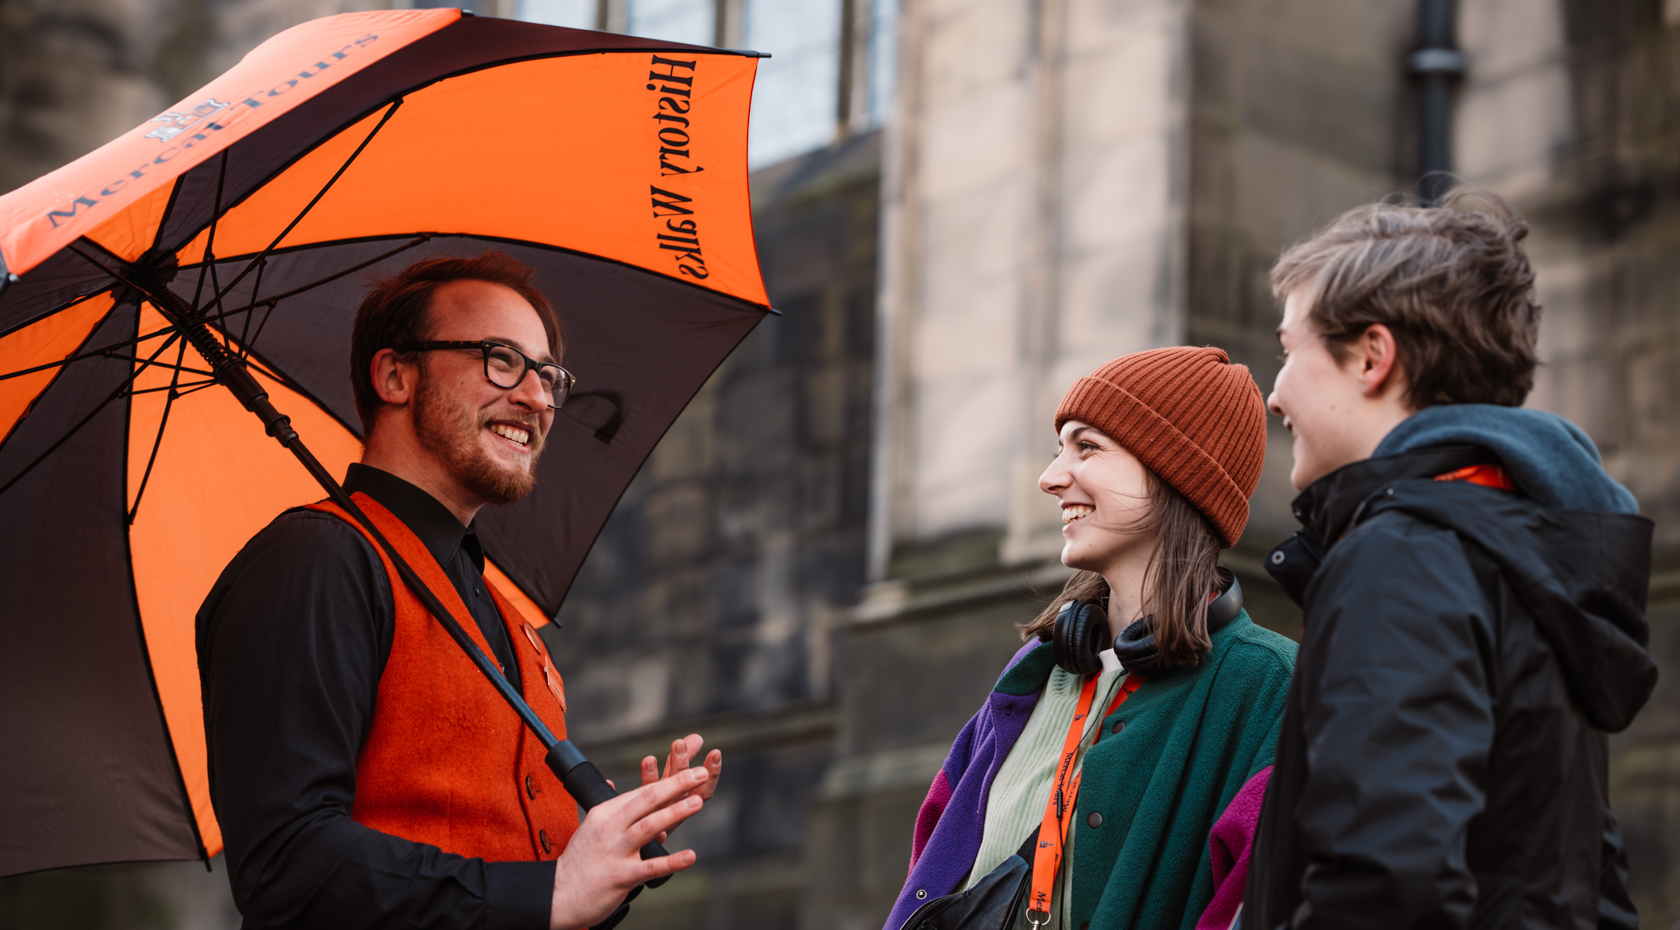 A Mercat Tours Support Team member holding a brand umbrella, talking to two visitors wearing TourTalks and headphones.